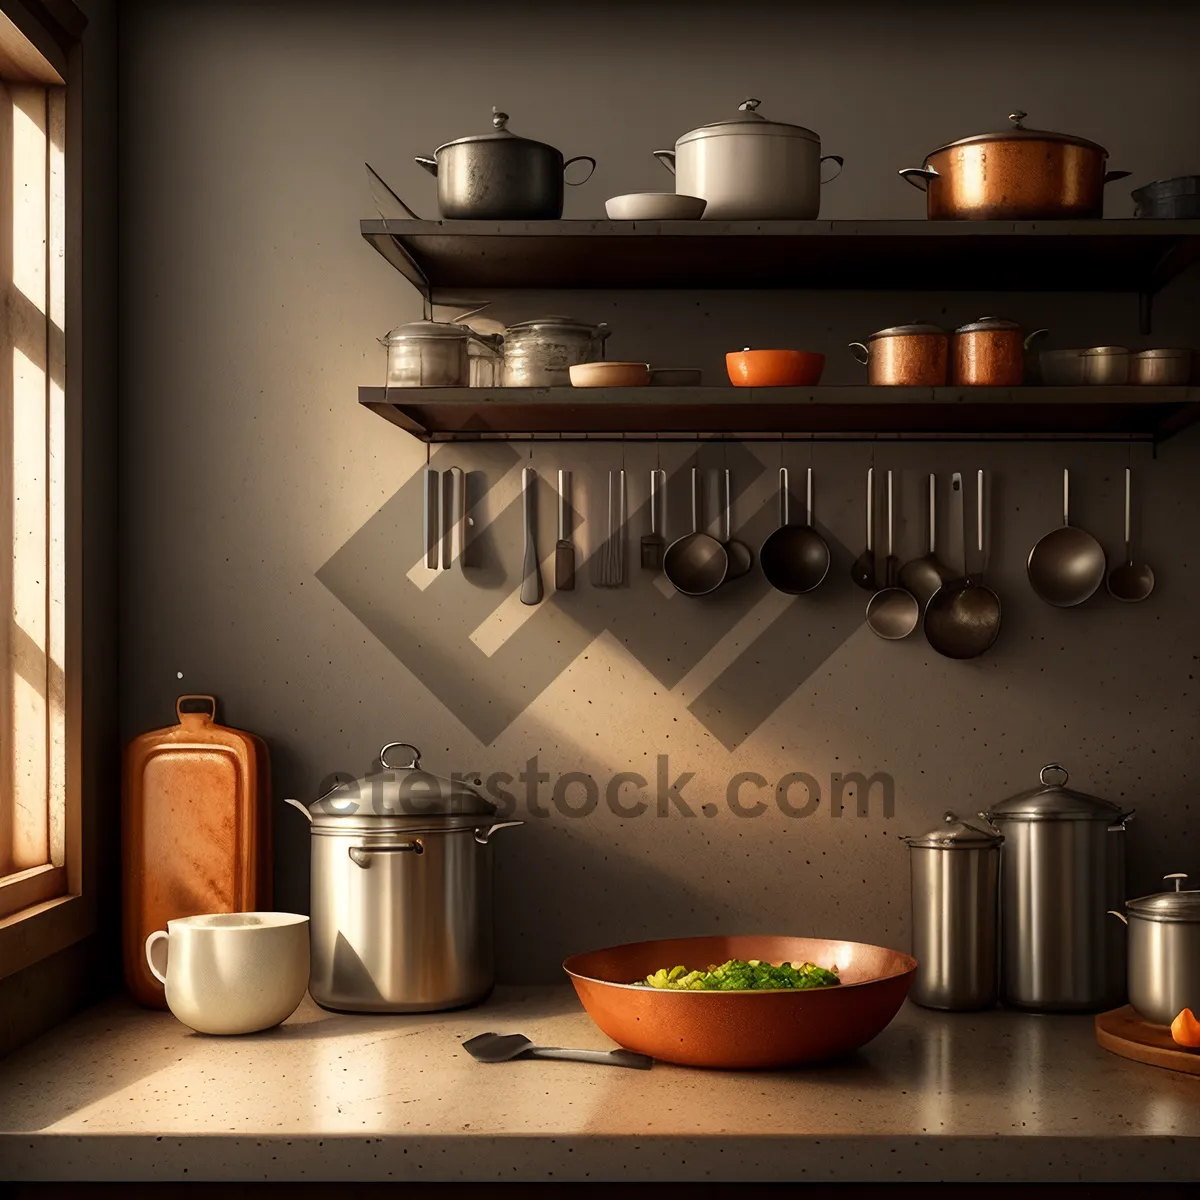 Picture of Modern Kitchen Plate Rack: Stylish & Functional Home Decor